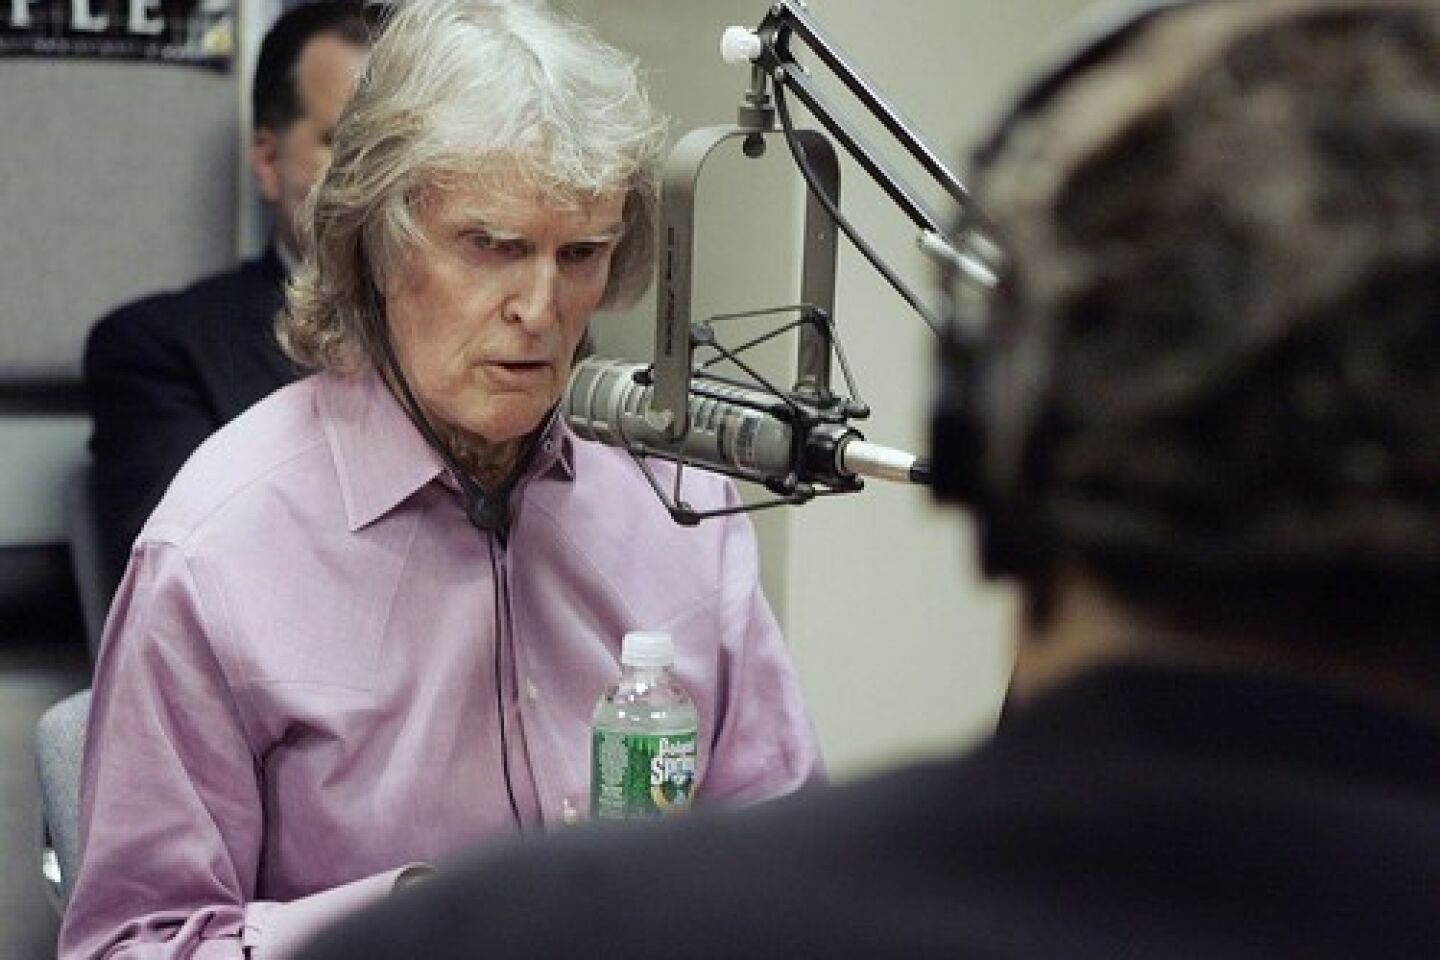 Pioneering shock jock Don Imus was one of radio’s most popular and polarizing figures. Born in Riverside, he became a top broadcaster in New York, but he also sparked a national firestorm in 2007 with a racist remark about the Rutgers University women’s basketball team. He was 79.